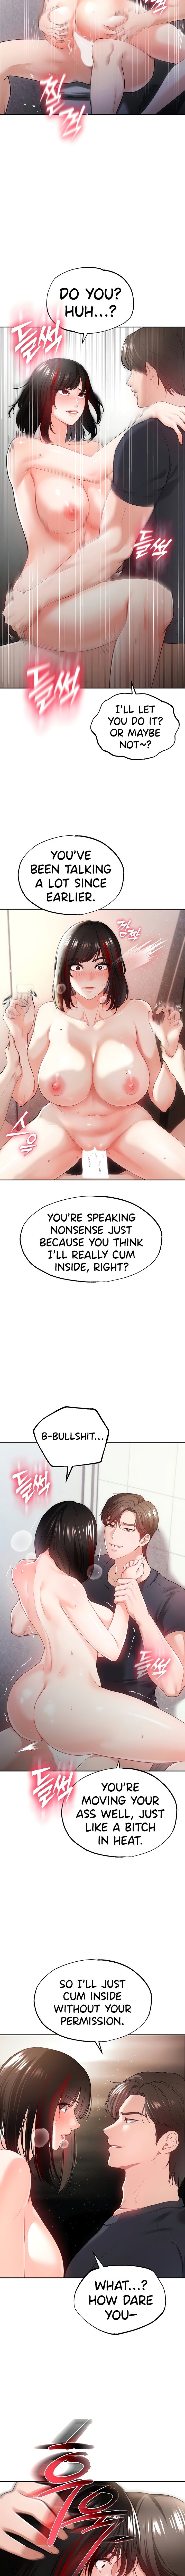 the-real-deal-chap-34-6